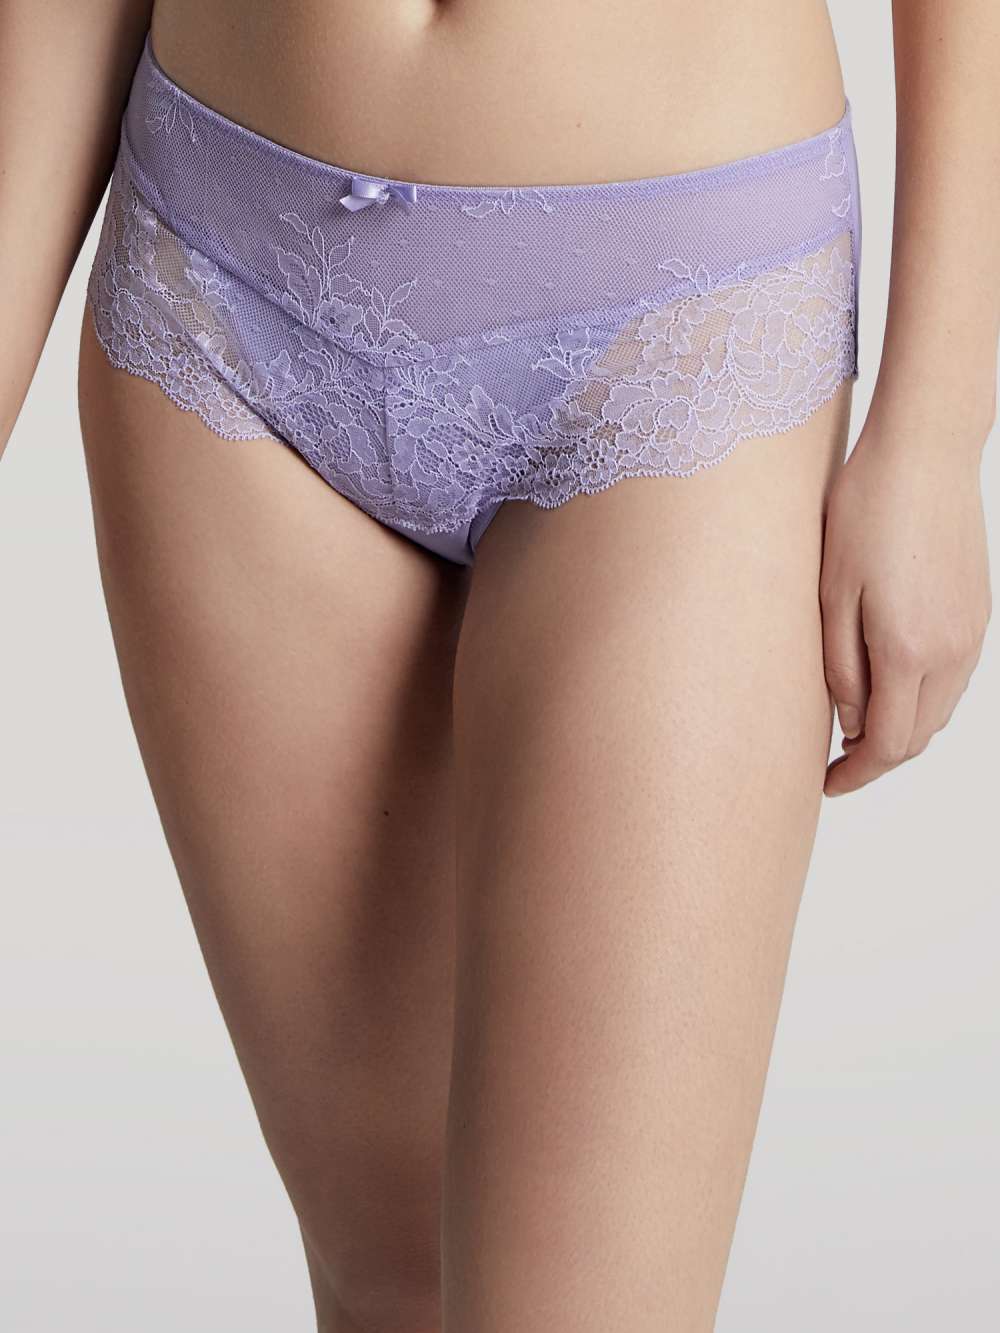 Ana Brief - Sweet Lavender worn by model, front view